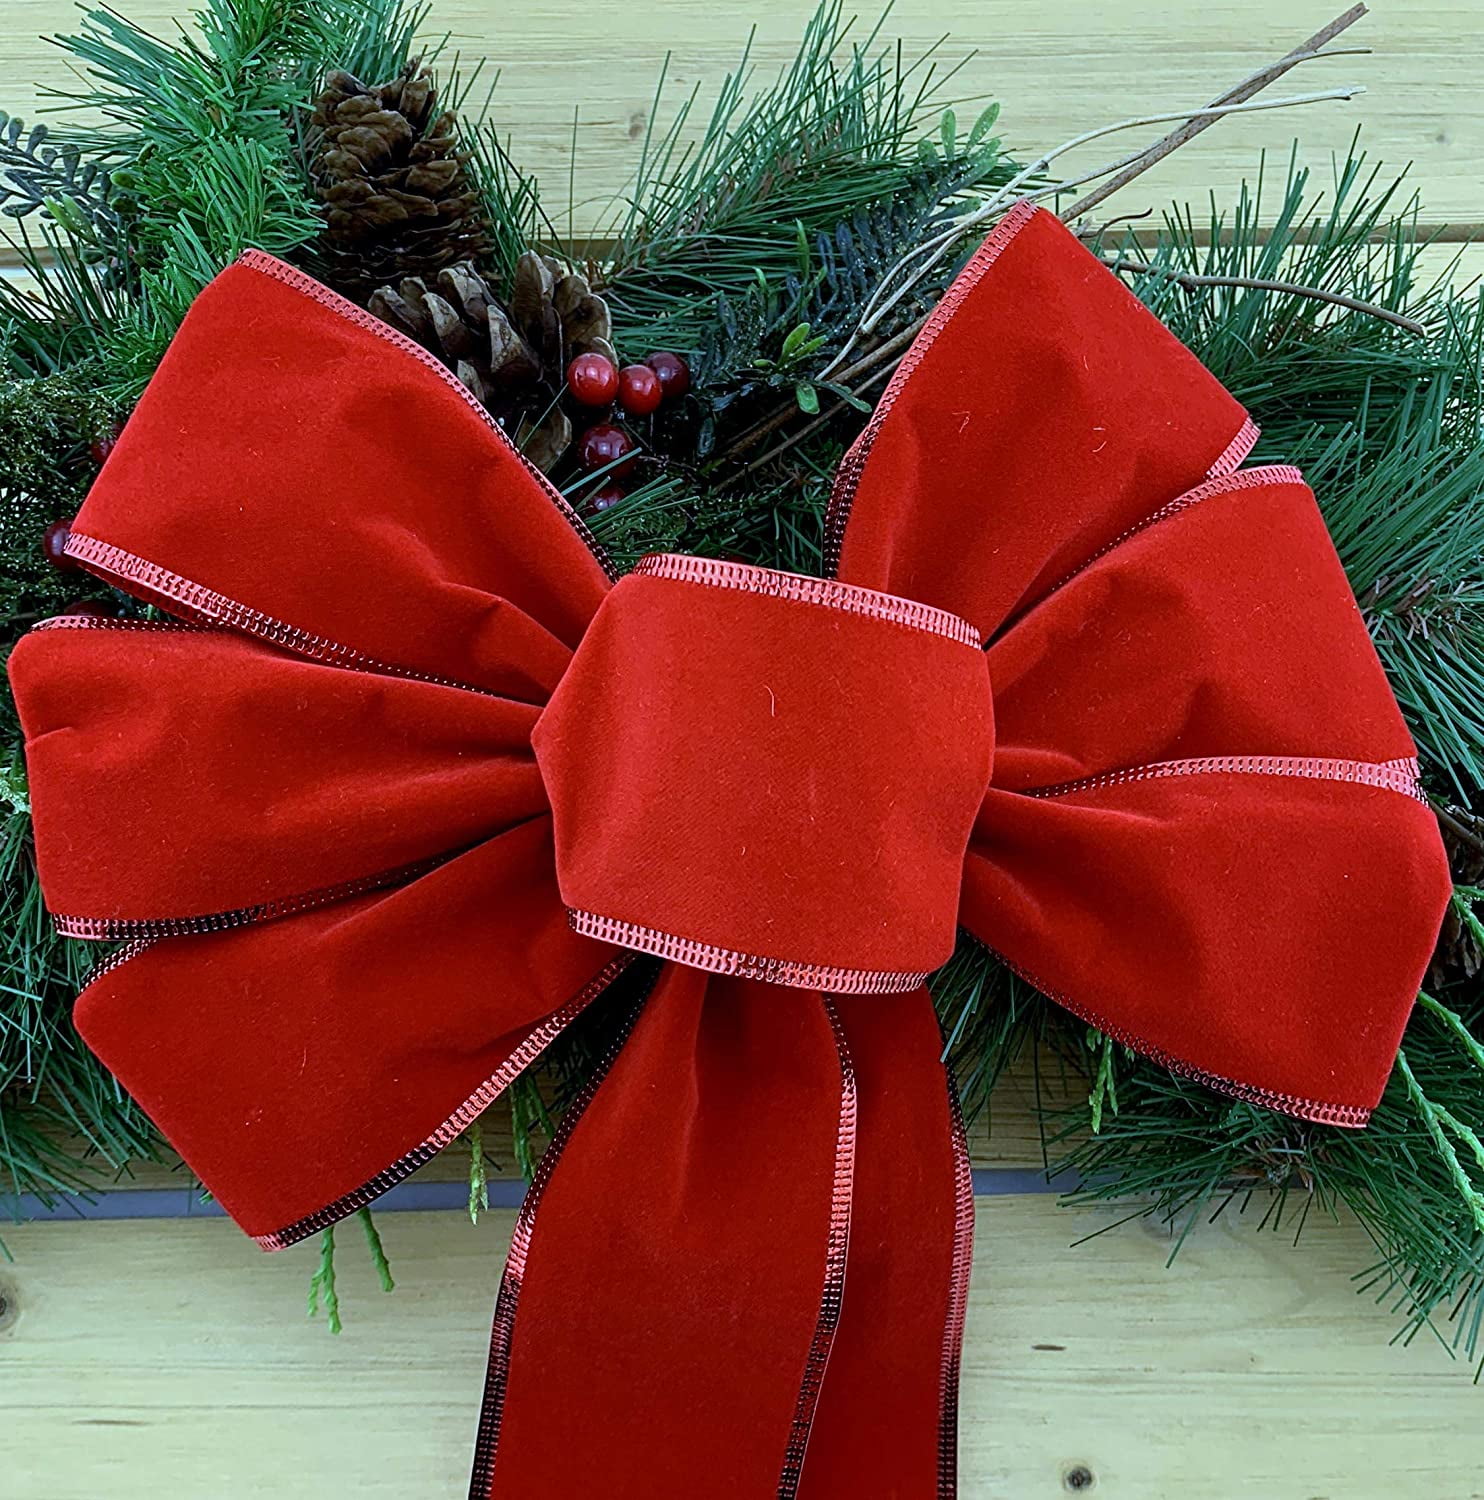 Set of 10 Red Velvet Christmas Wreath Bows, 9x13 - For Garland, Gifts,  Parties - Indoor/Outdoor Holiday Decor